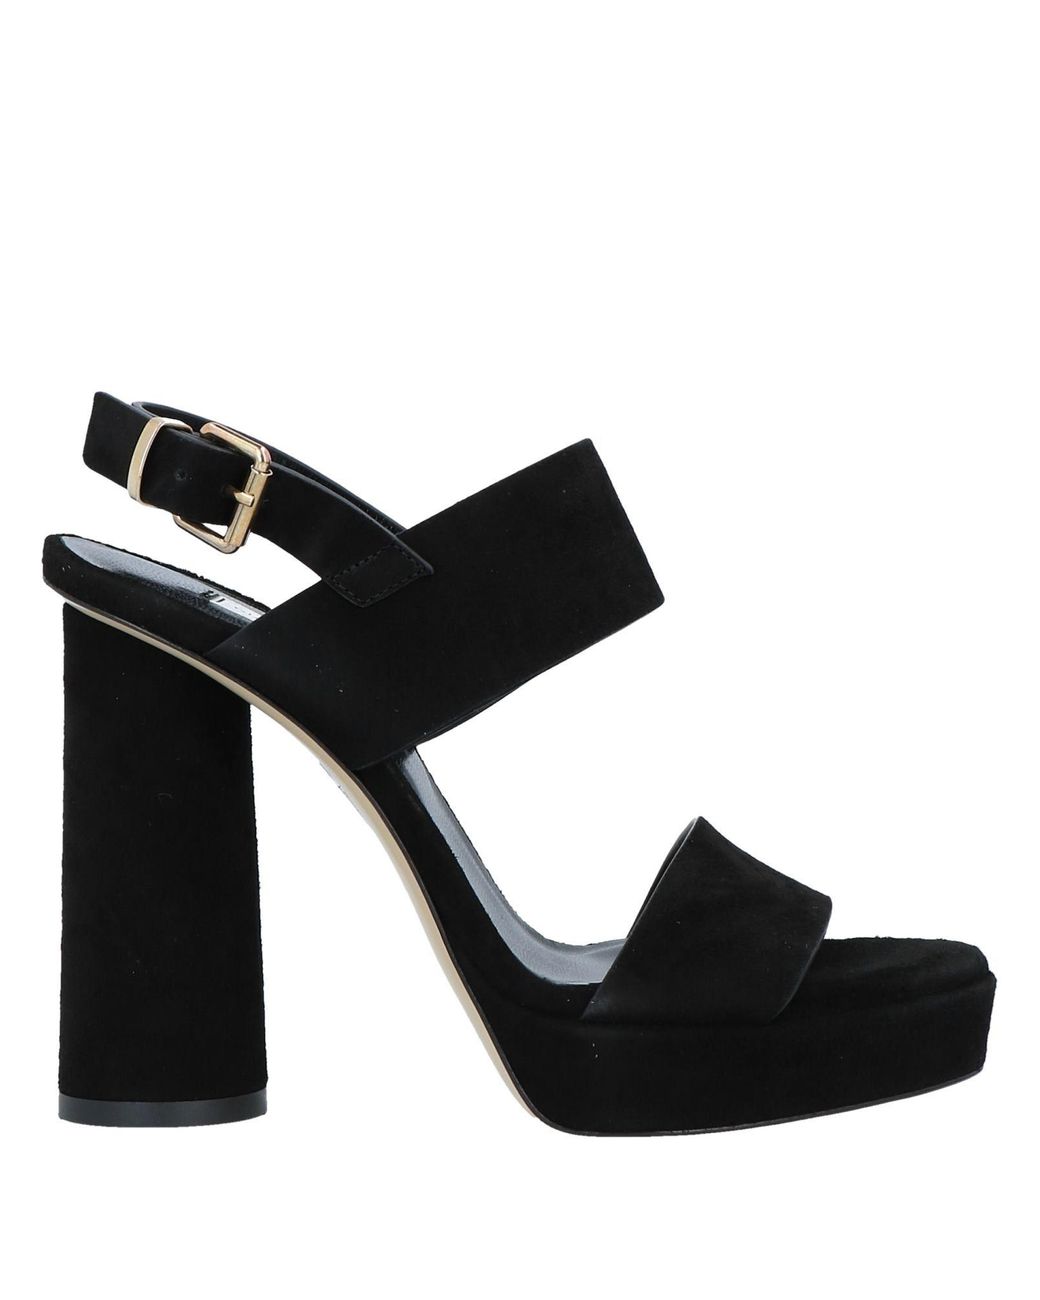 Giampaolo Viozzi Leather Sandals in Black - Lyst